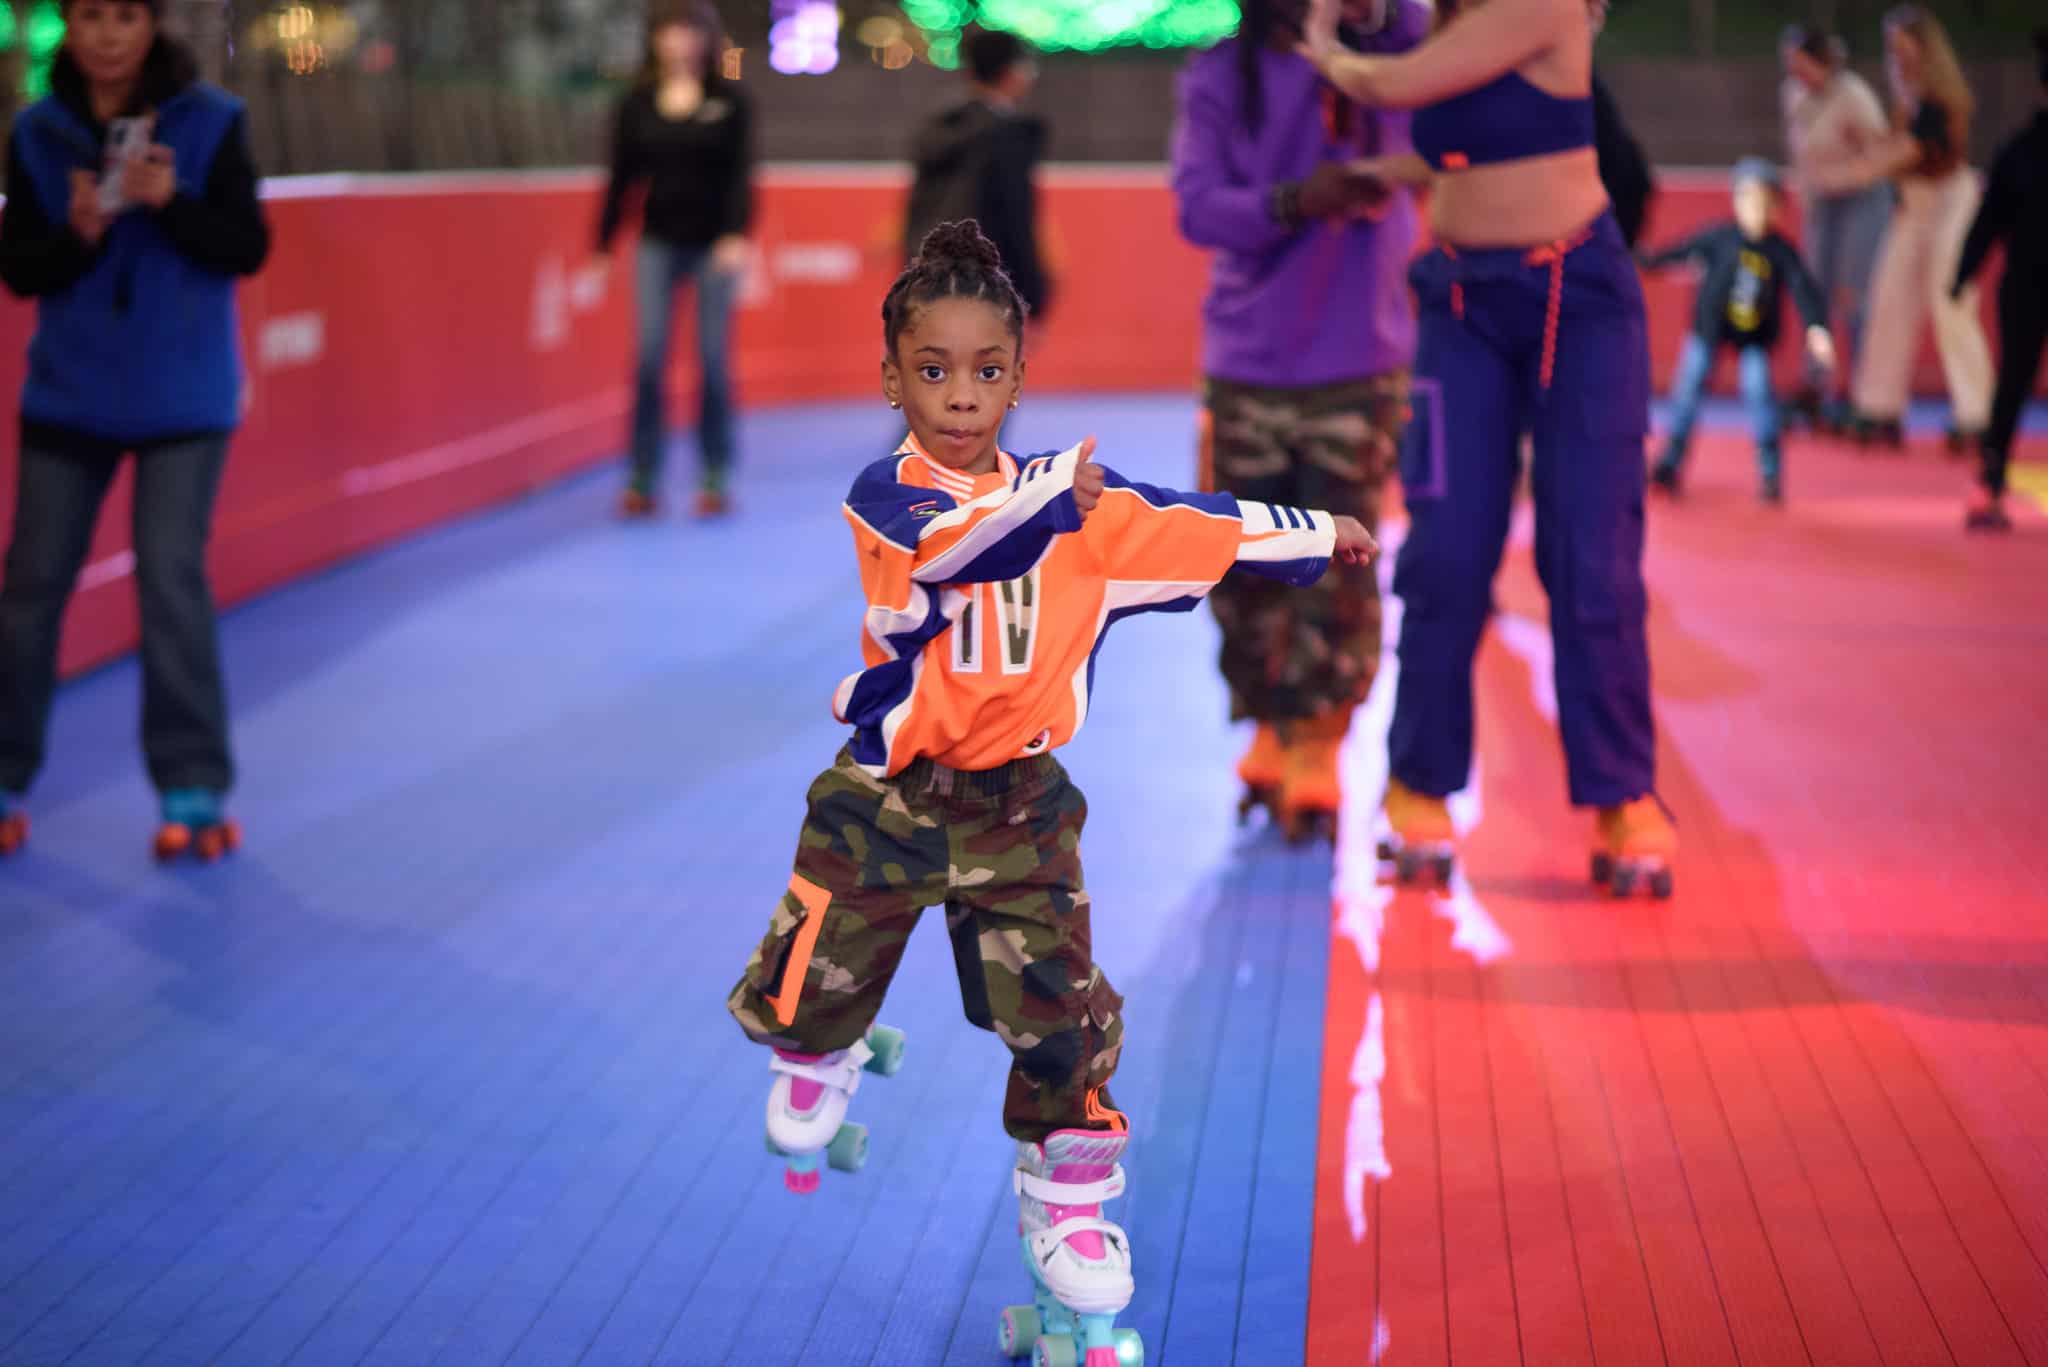 The Rink: Rolling at Discovery Green opening night sponsored by Ivy Park